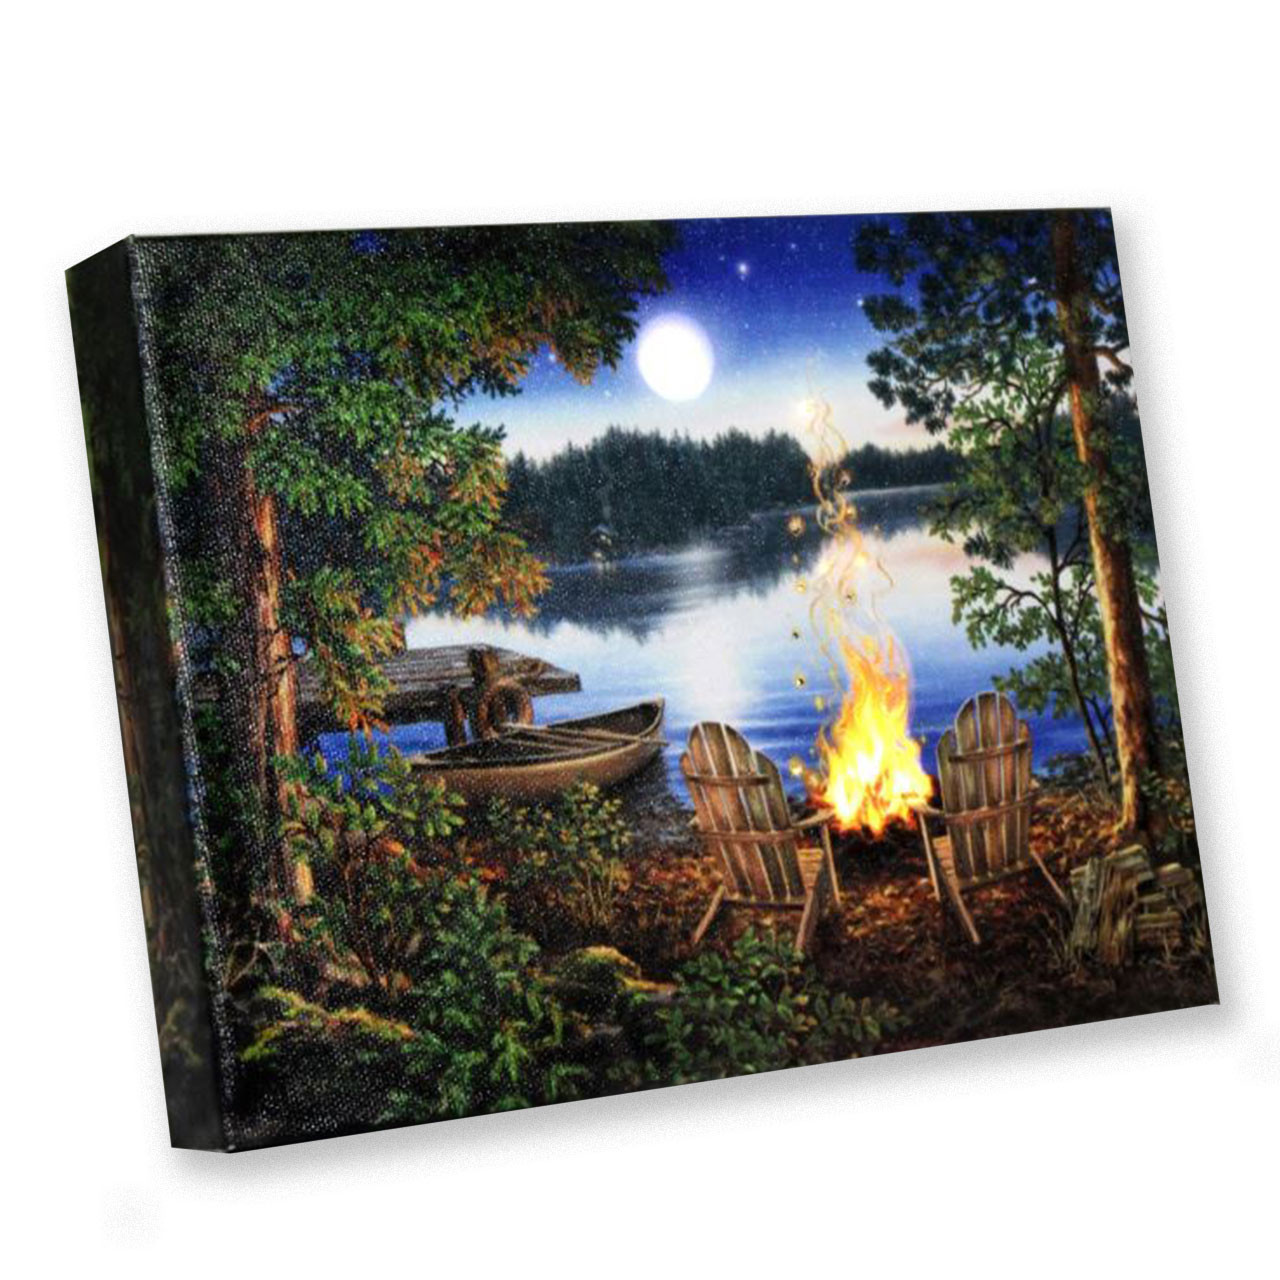 8"x6" Lakeside Tabletop Lighted Canvas